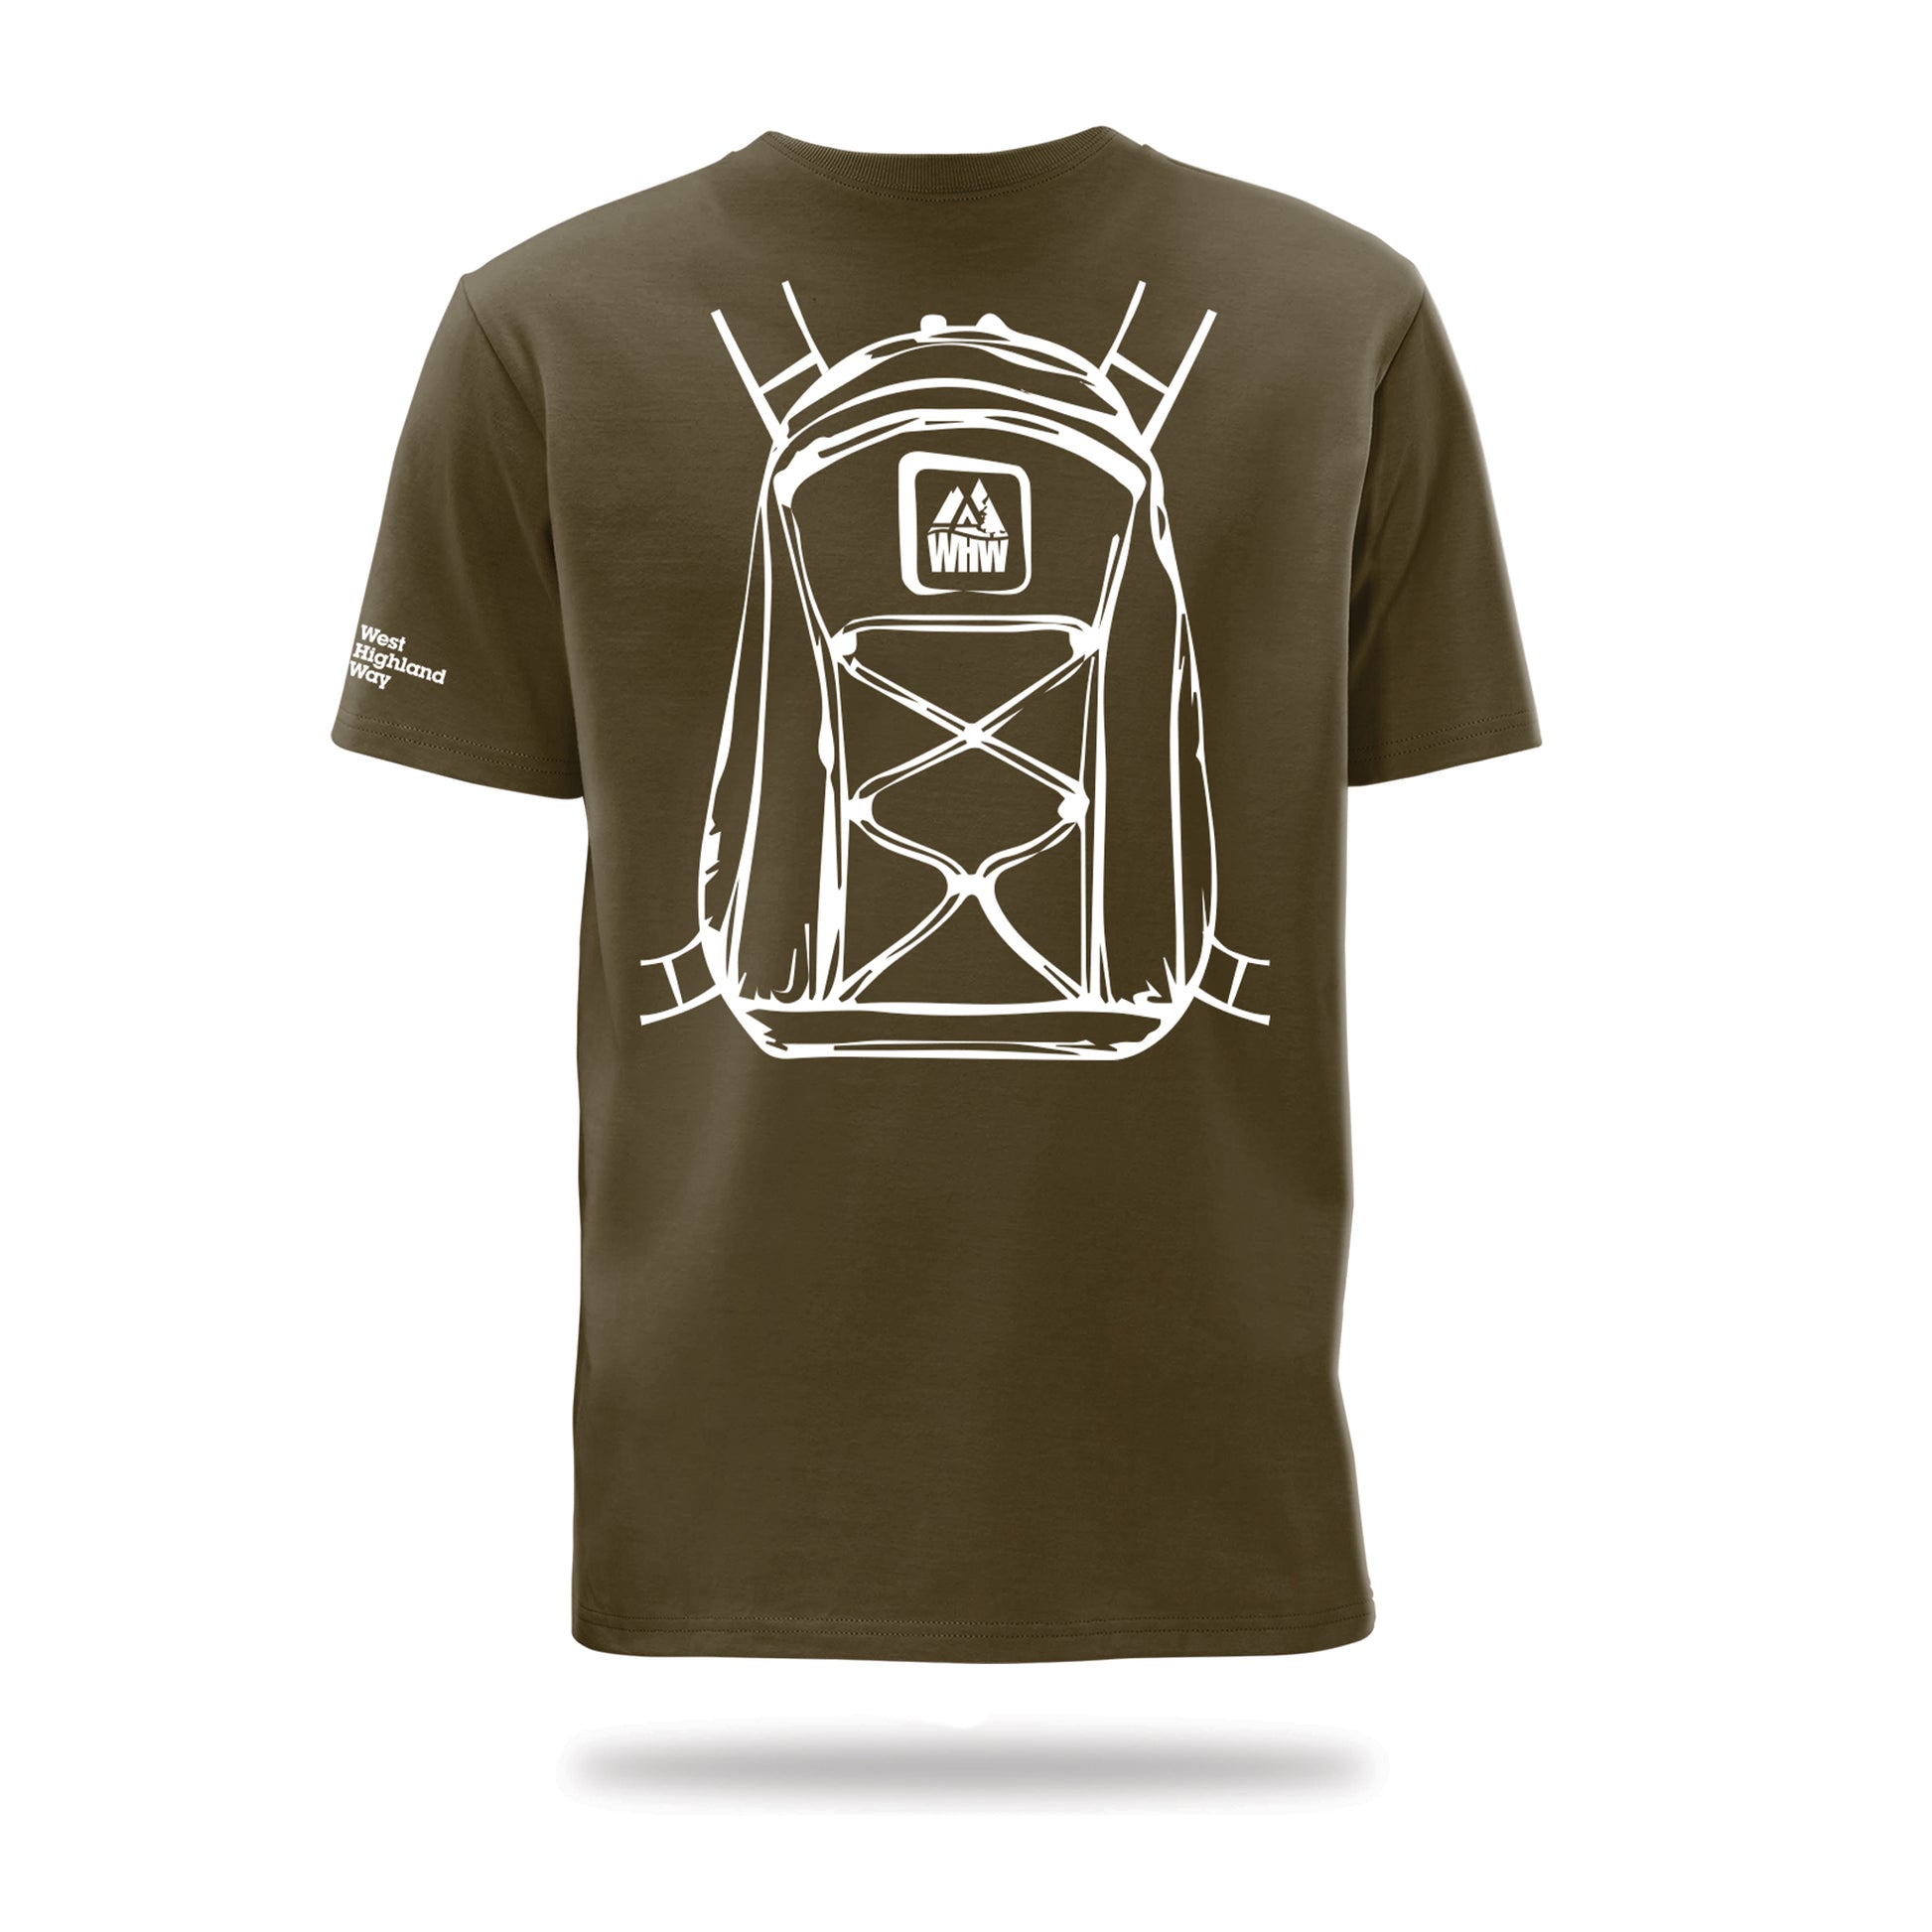 Brown West Highland Way T-Shirt showing illustrated backpack design on the back.